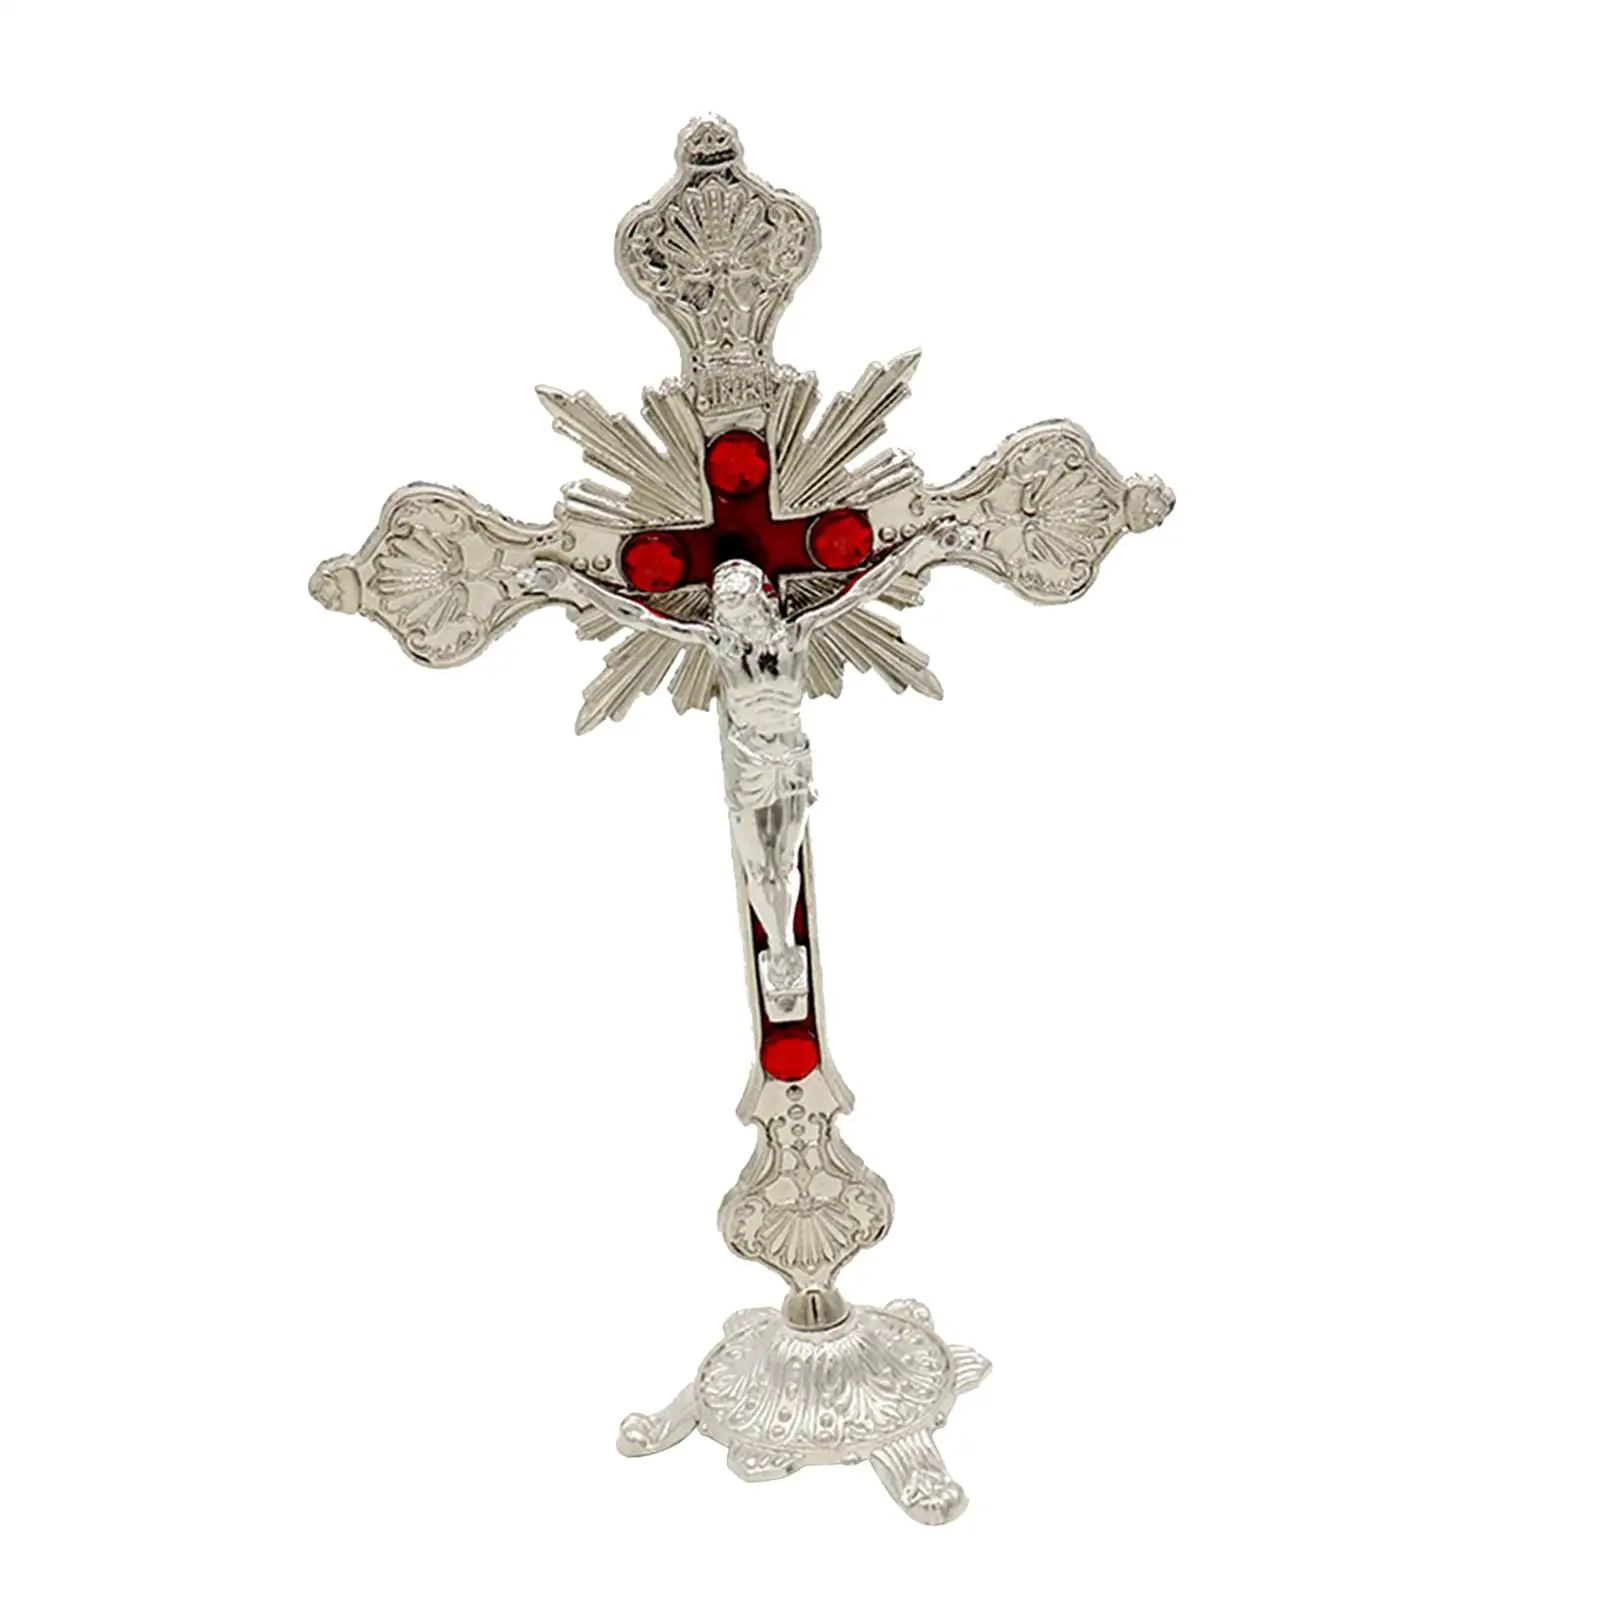 Metal Crucifix Table Cross, Catholic Table Cross with Stand for Prayer